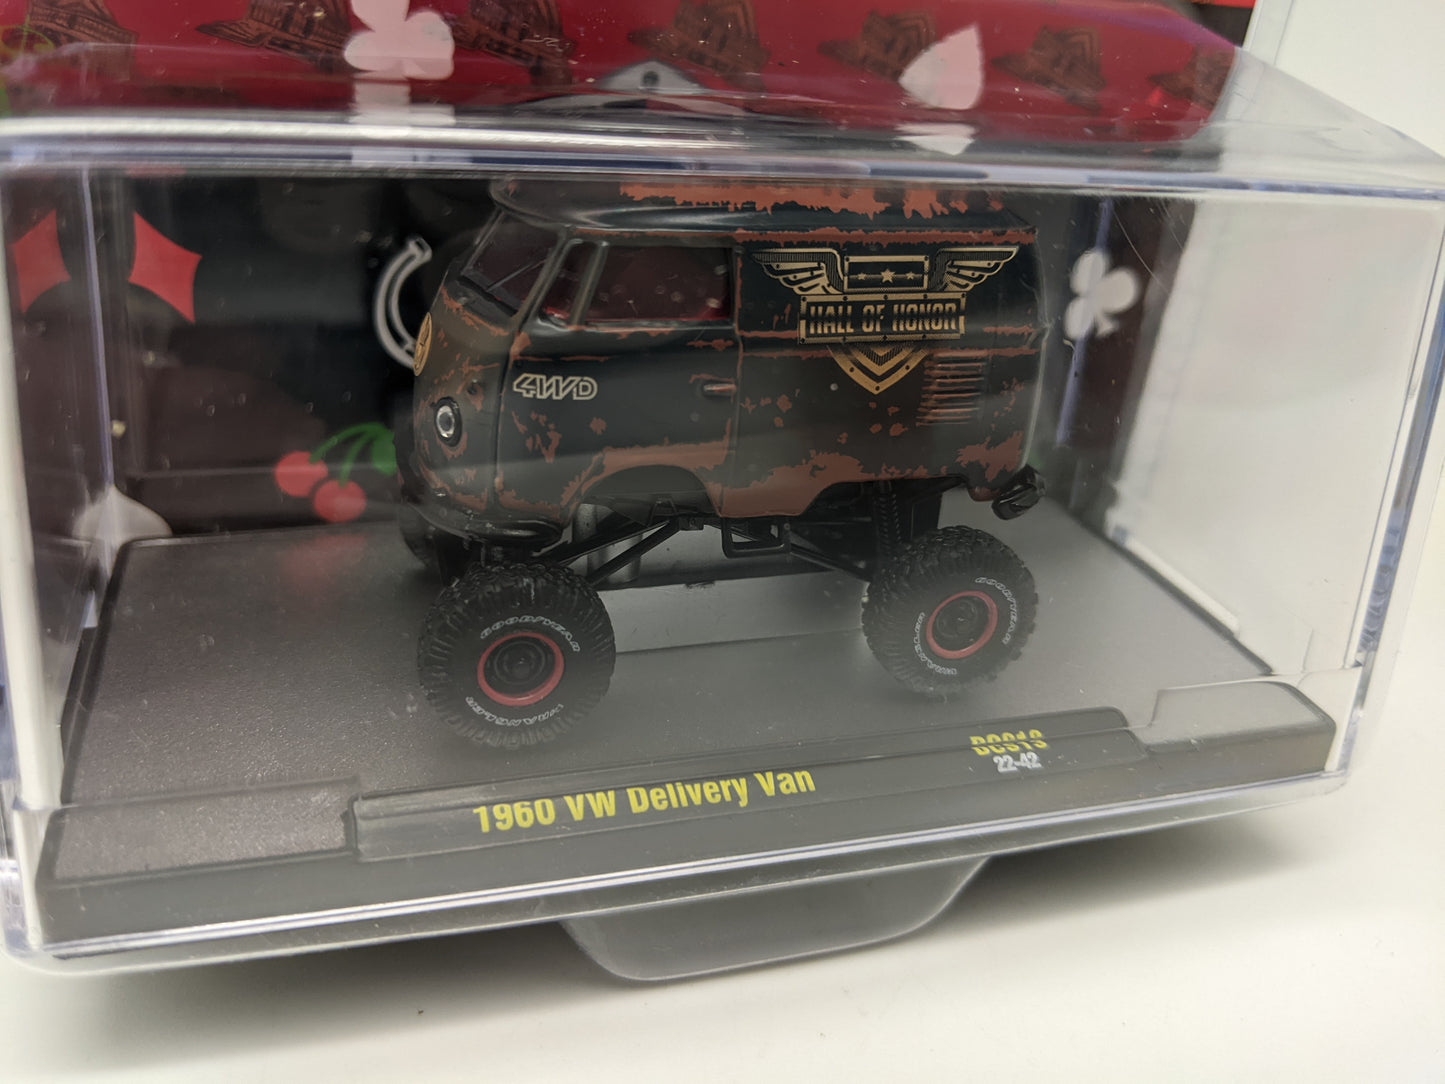 M2 1960 VW Delivery Van - Hall of Honor Diecast Super Convention